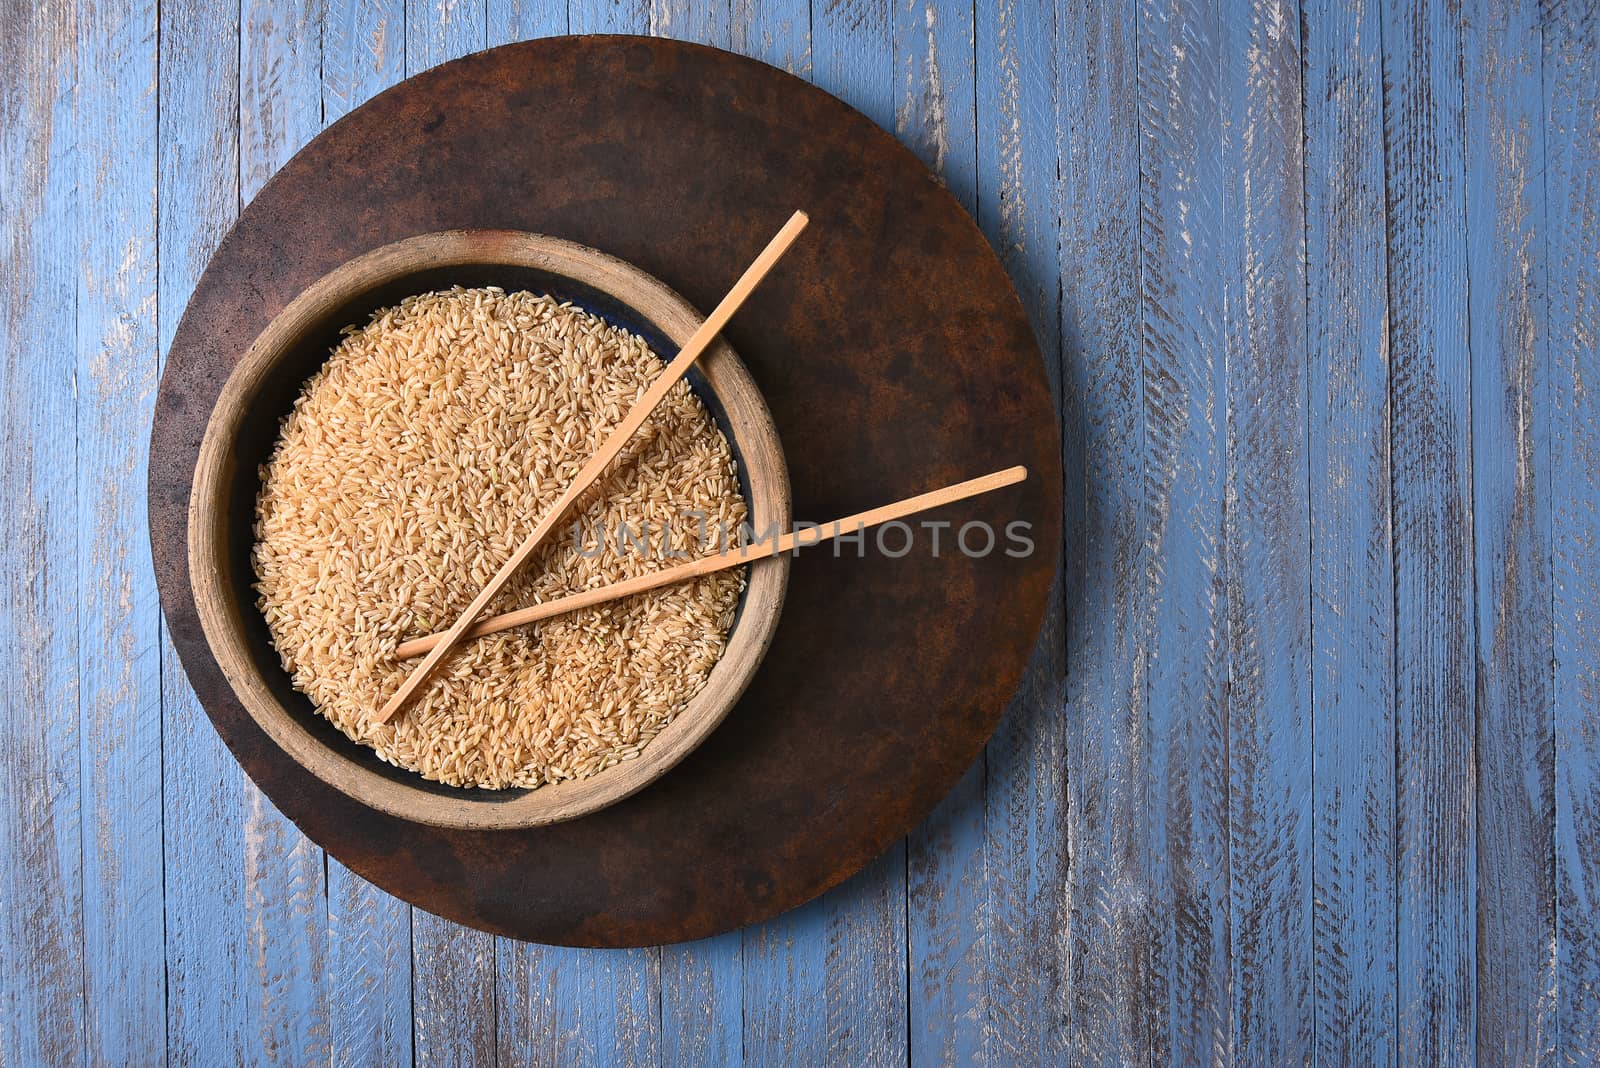 Brown Rice and Chop Sticks by sCukrov